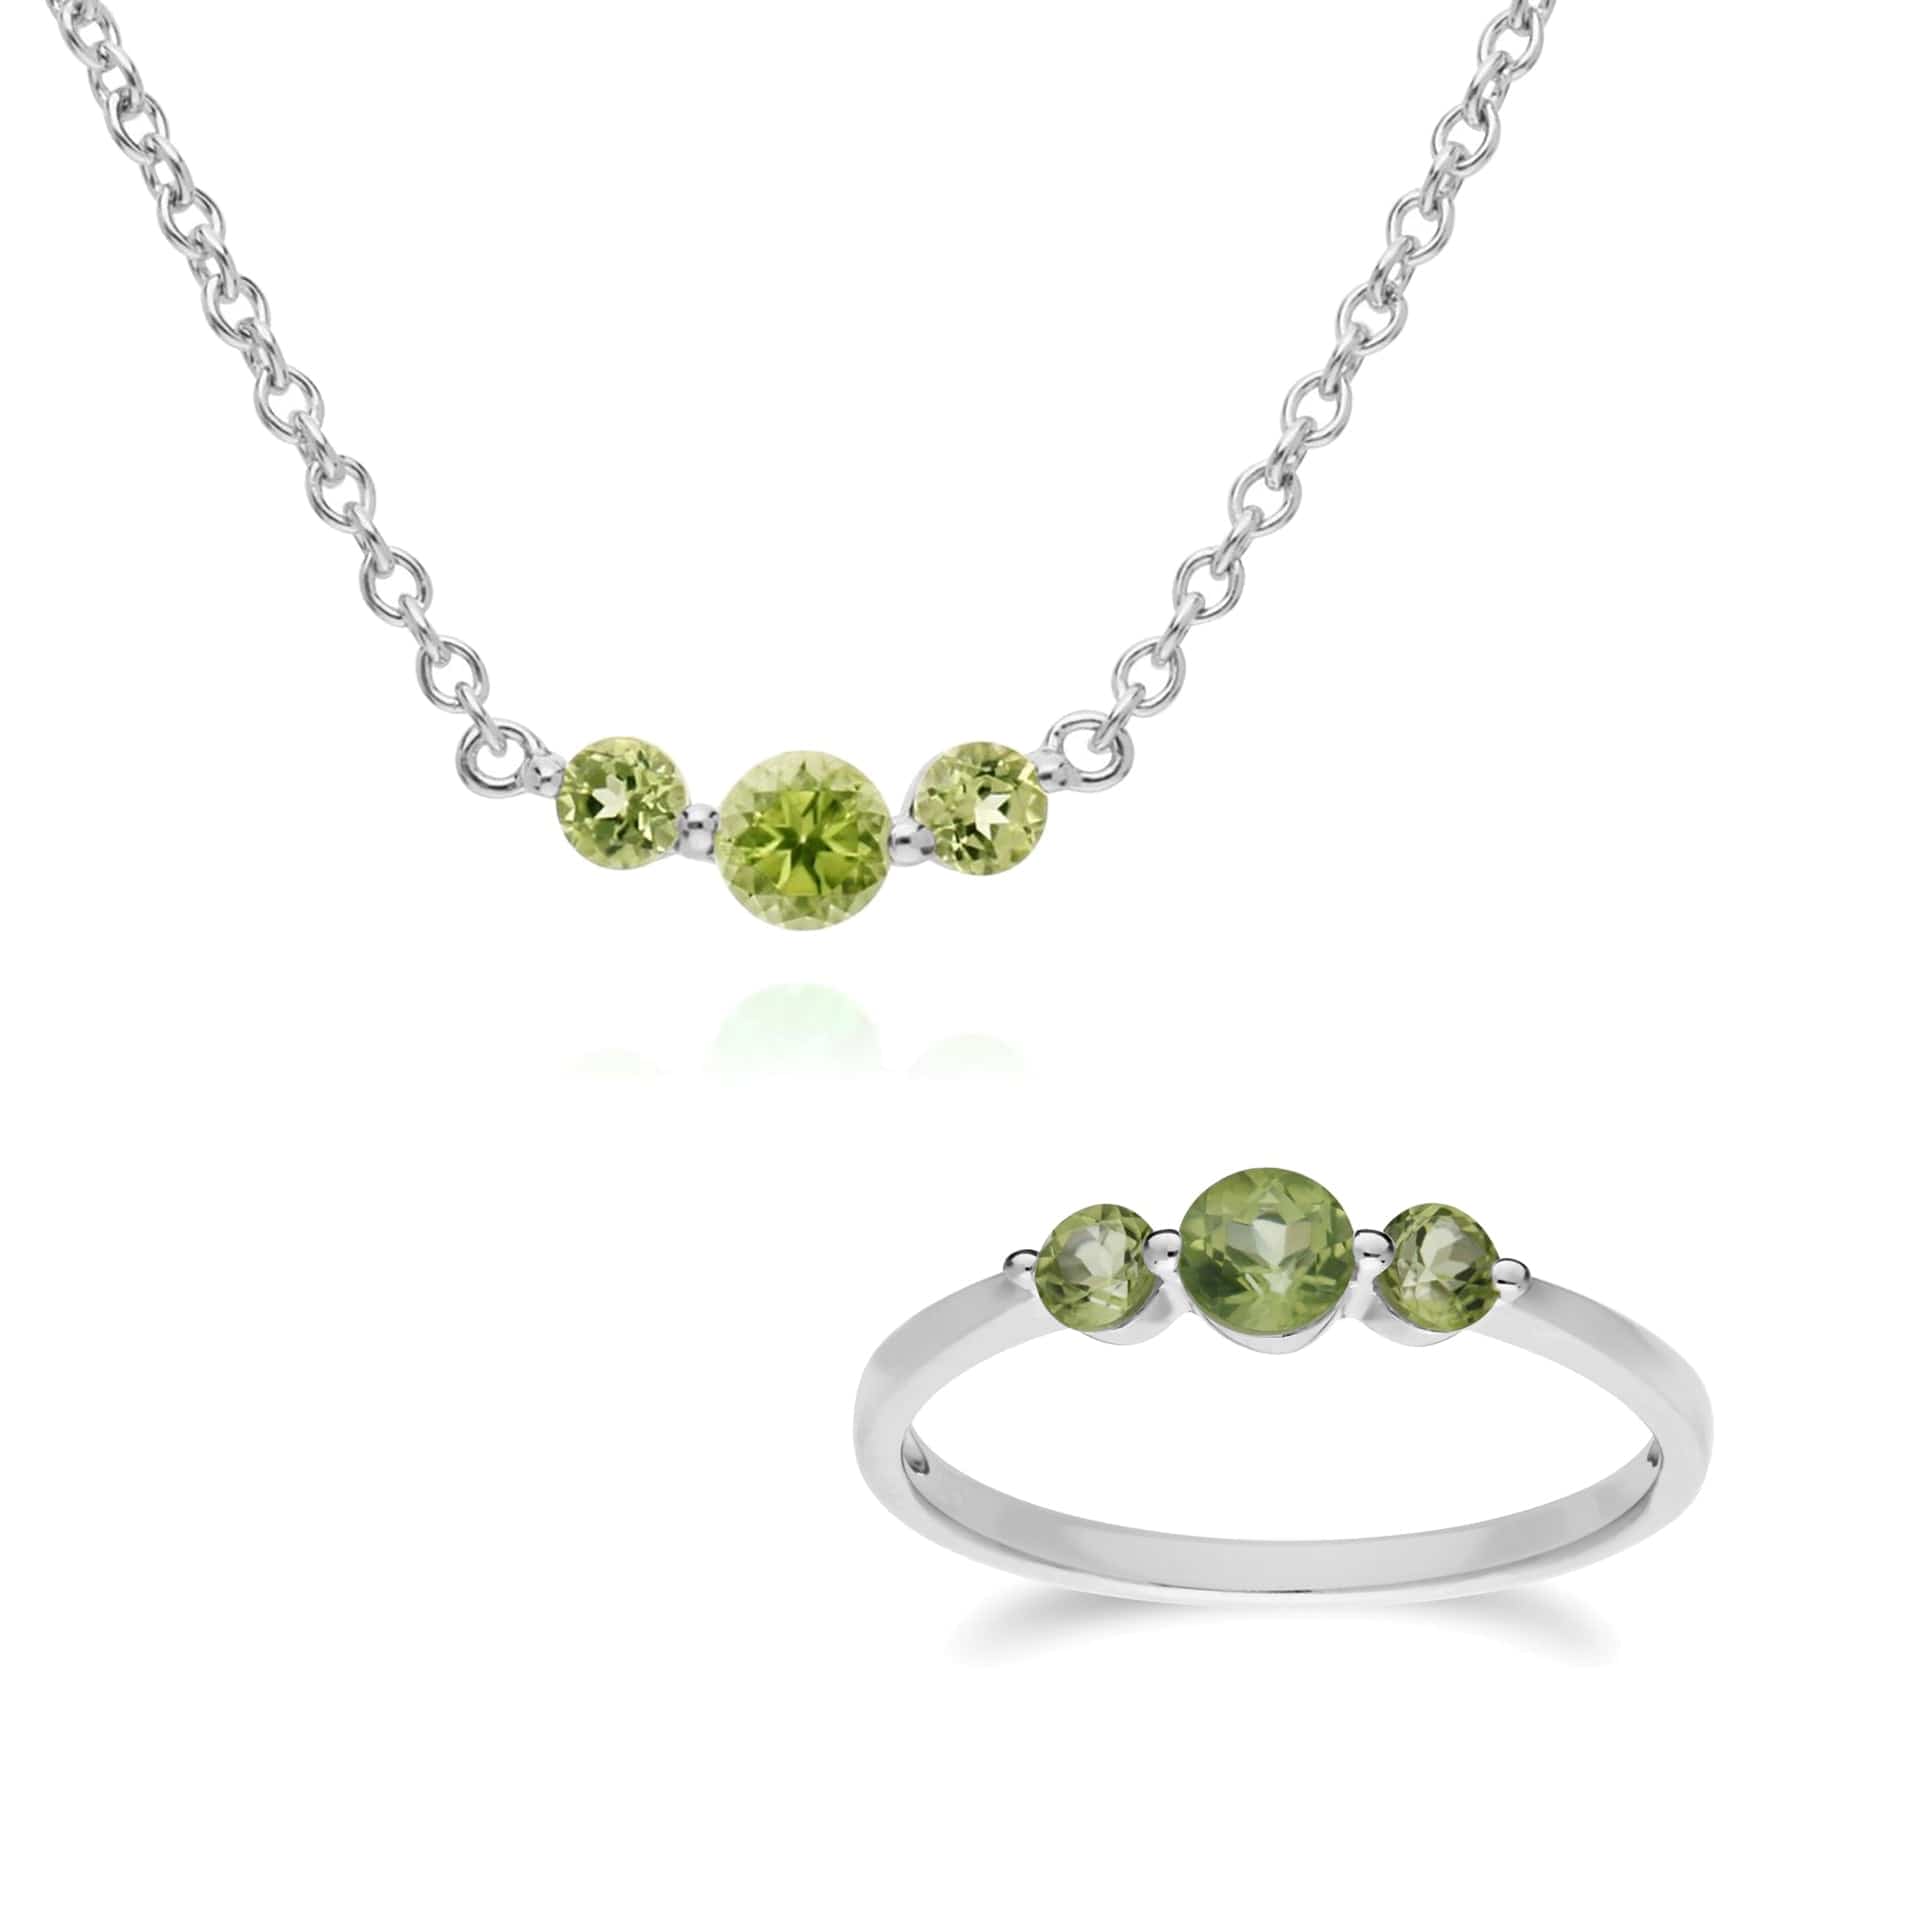 270N034204925-270R056004925 Classic Round Peridot Three Stone Gradient Ring & Necklace Set in 925 Sterling Silver 1